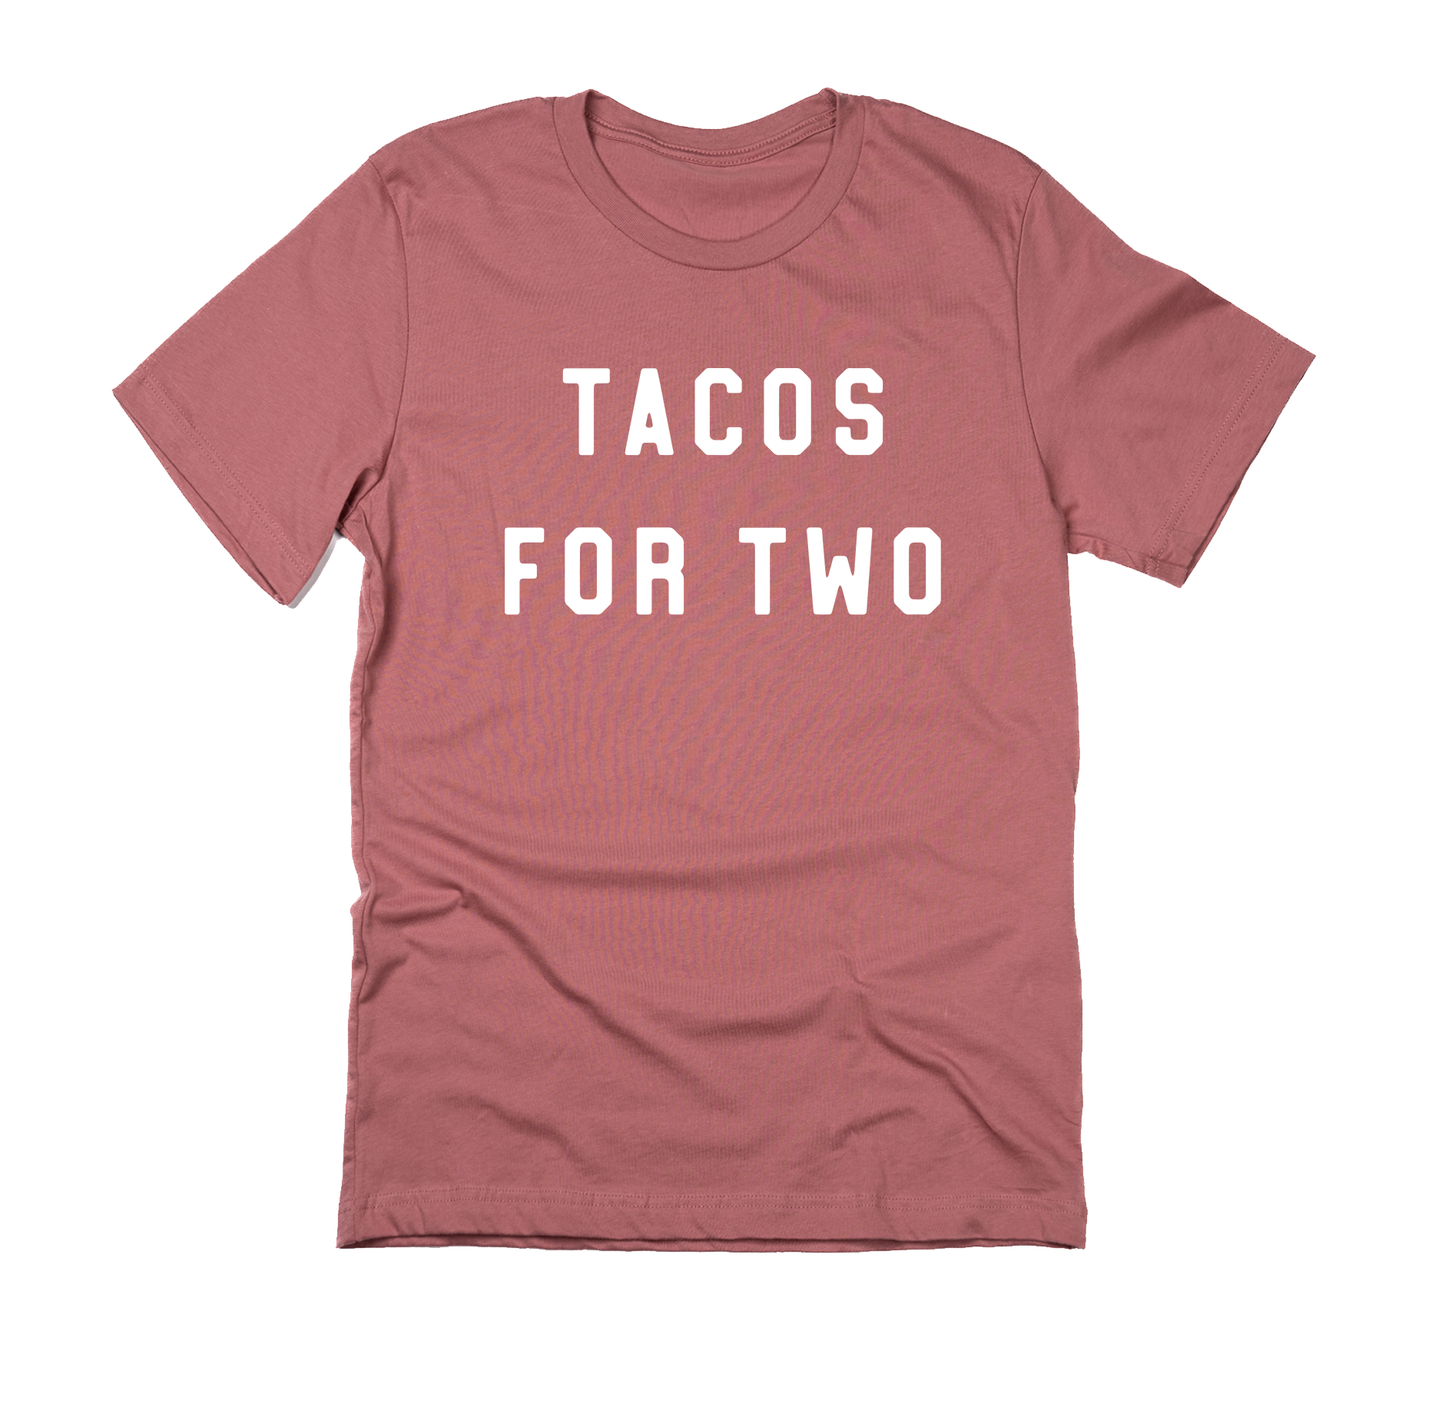 Tacos For Two (White) - Tee (Mauve)